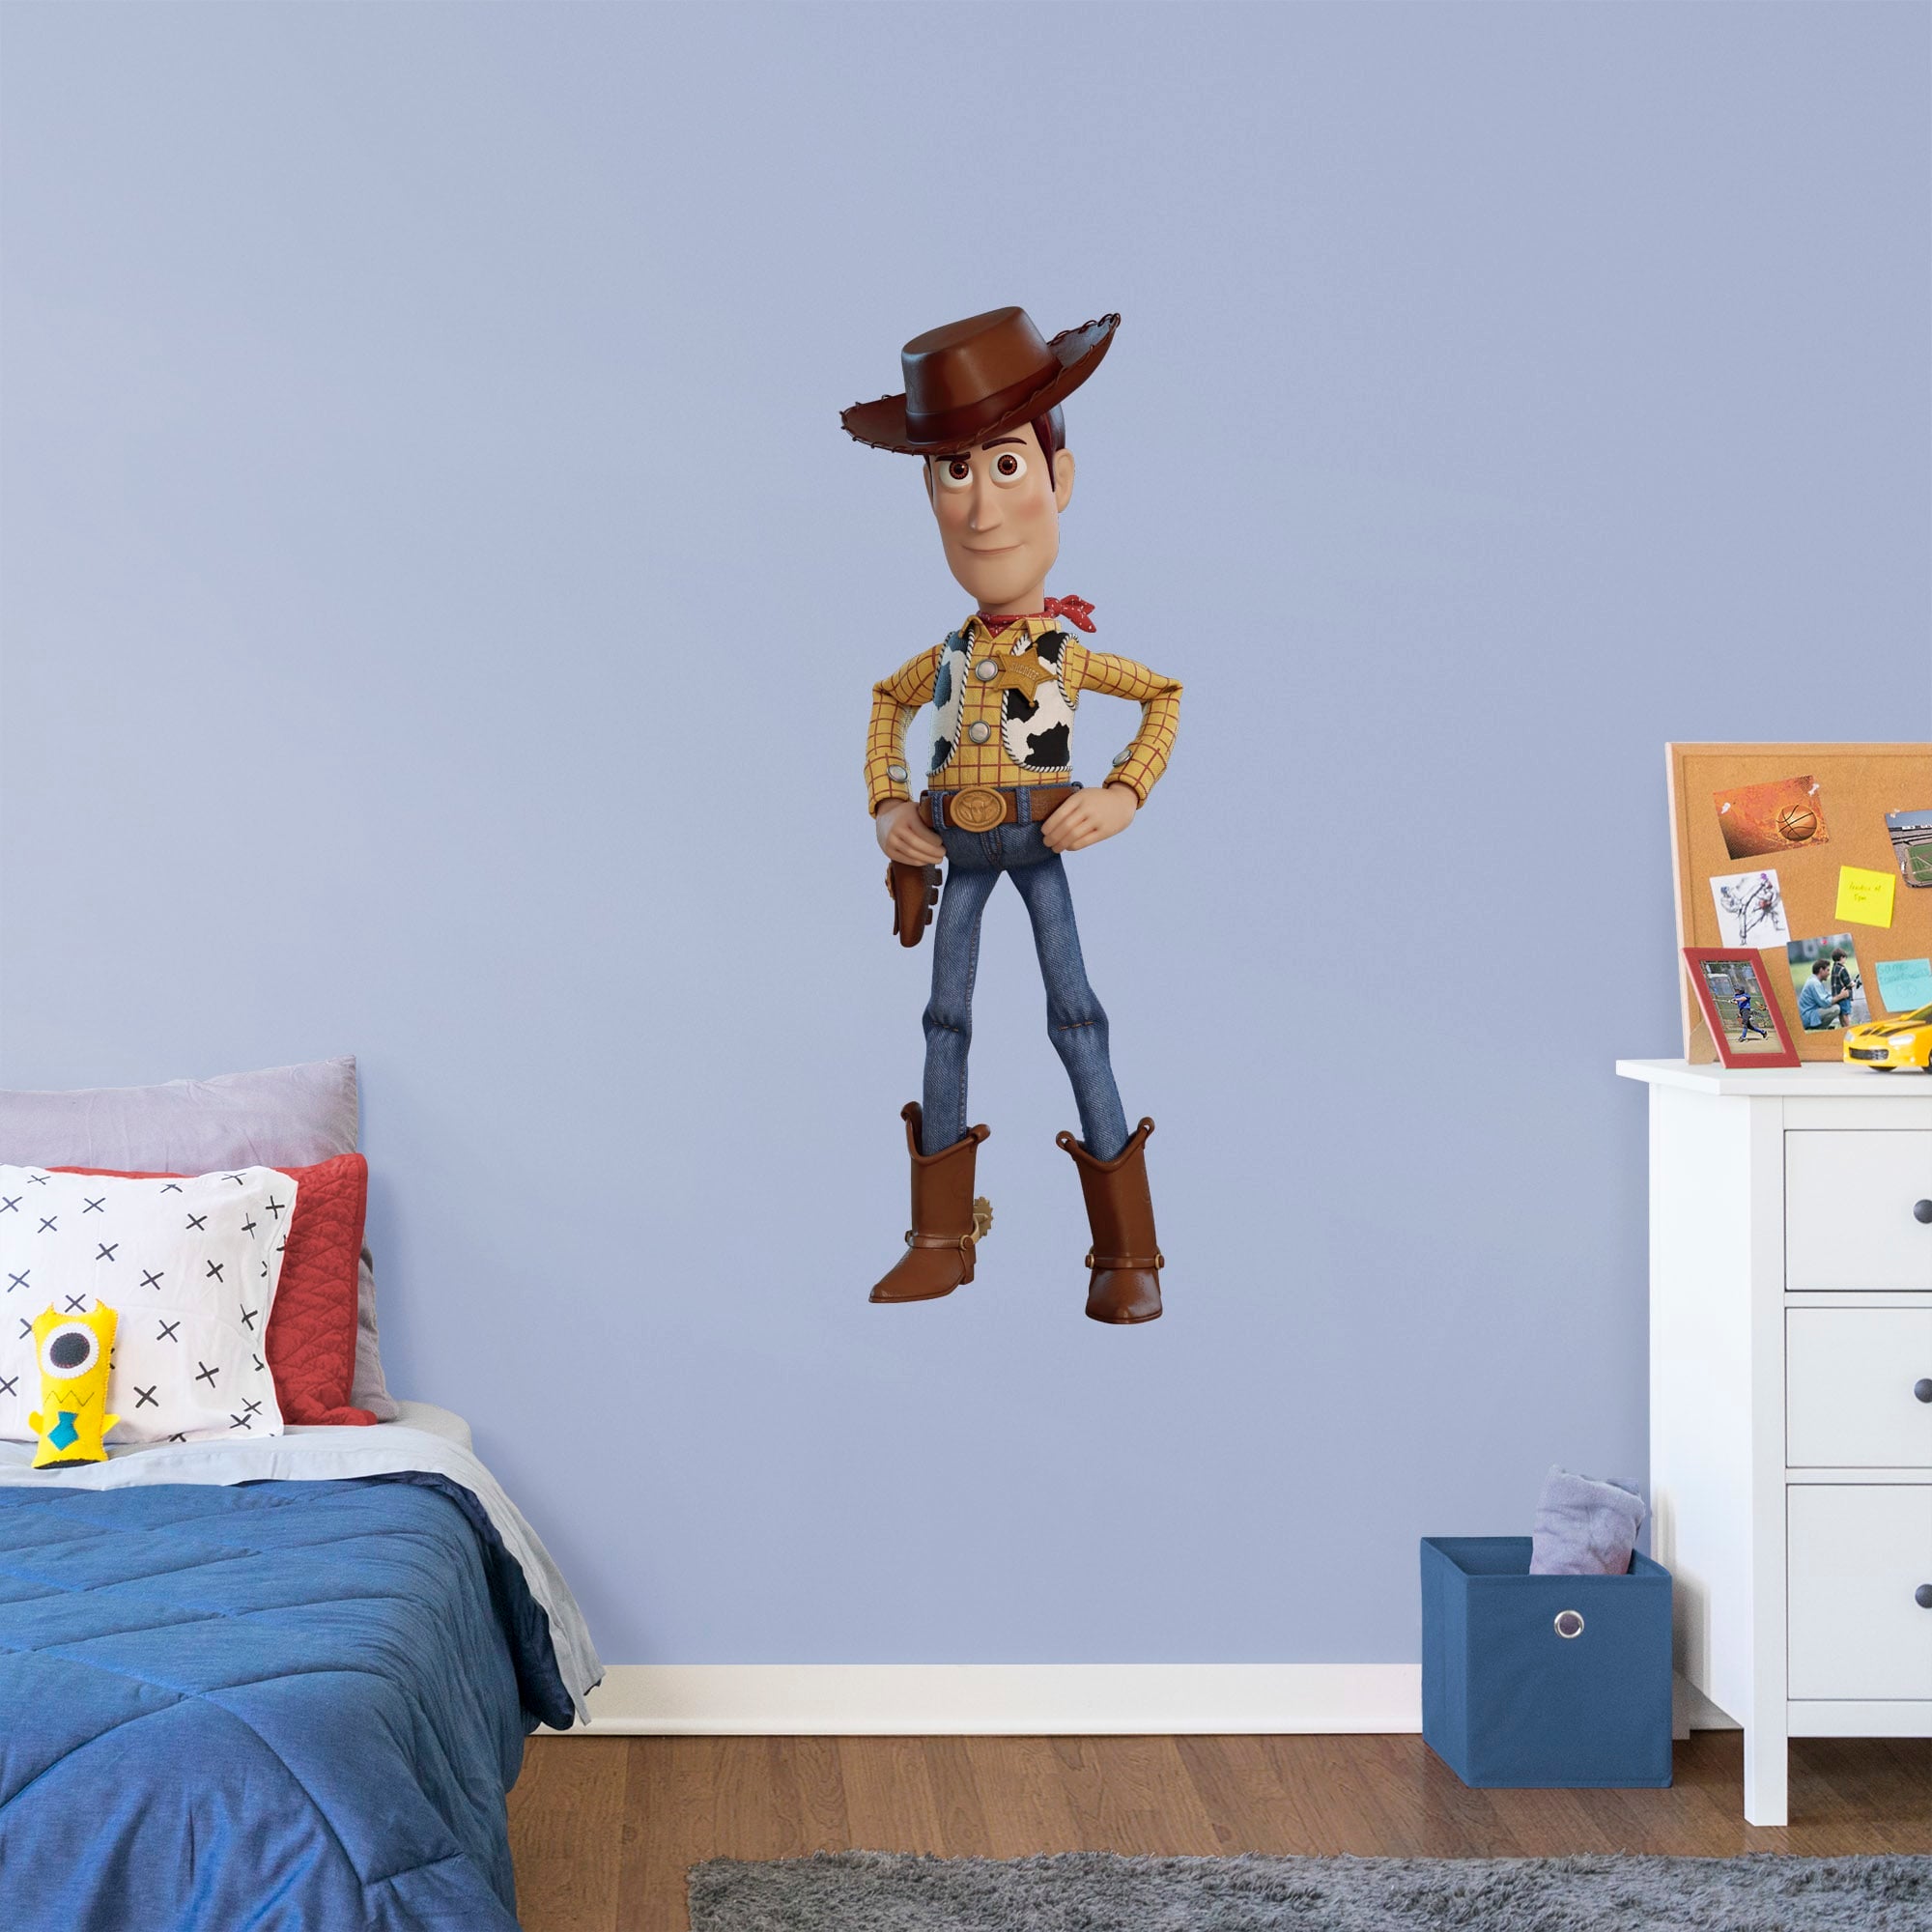 Toy Story 4: Woody - Officially Licensed Disney/PIXAR Removable Wall Graphic Giant Character + 2 Decals (17"W x 51"H) by Fathead